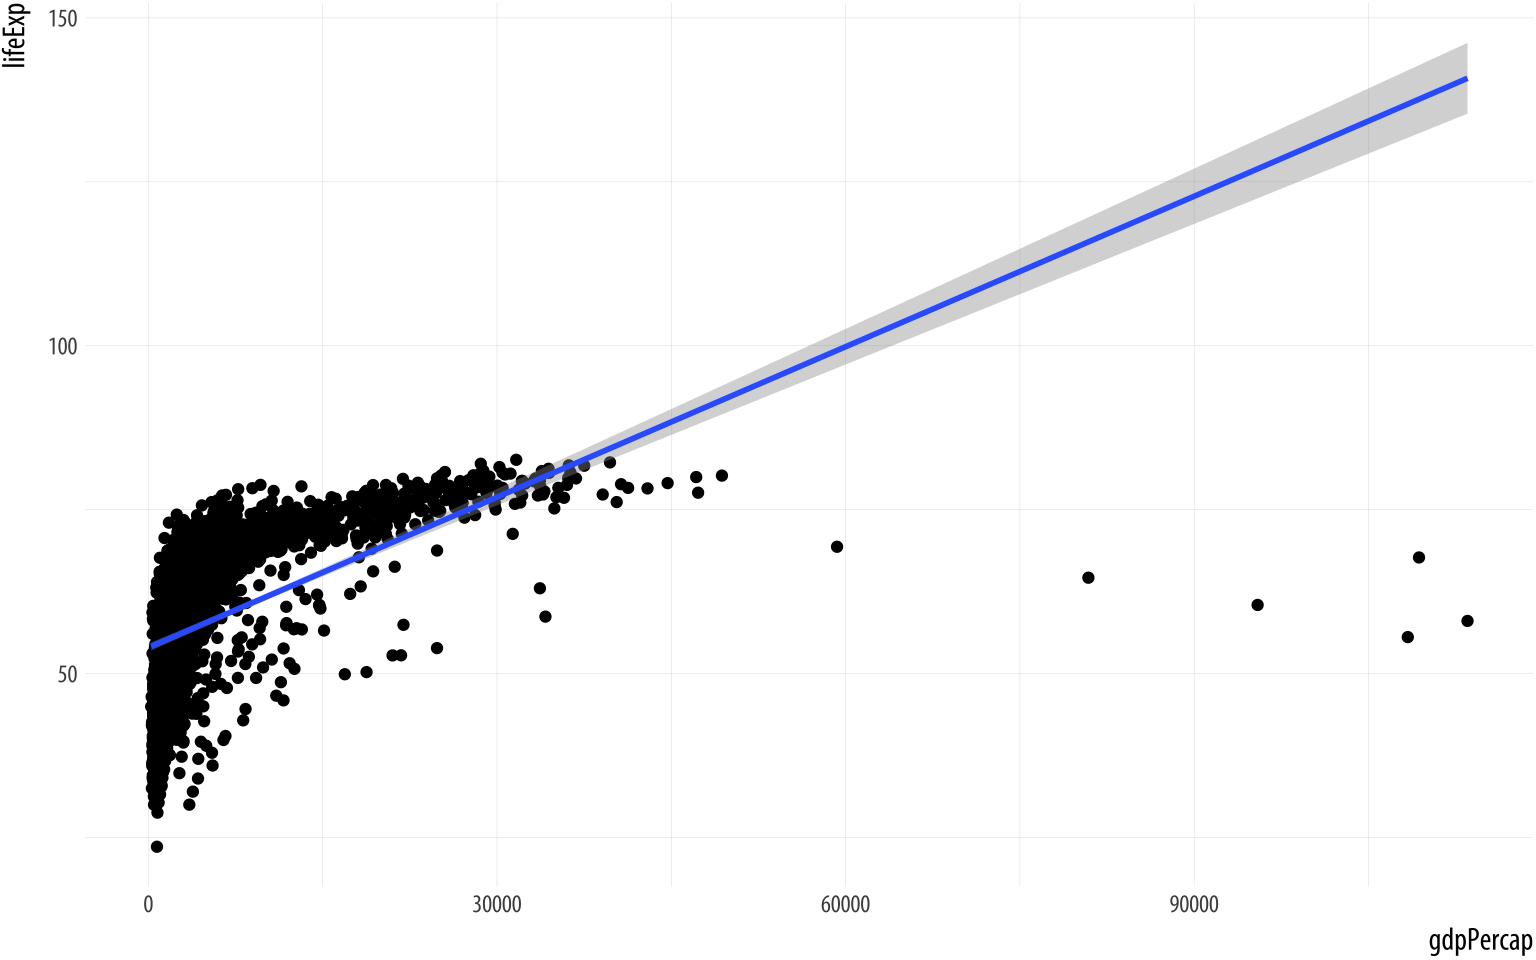 Life Expectancy vs GDP, points and an ill-advised linear fit.